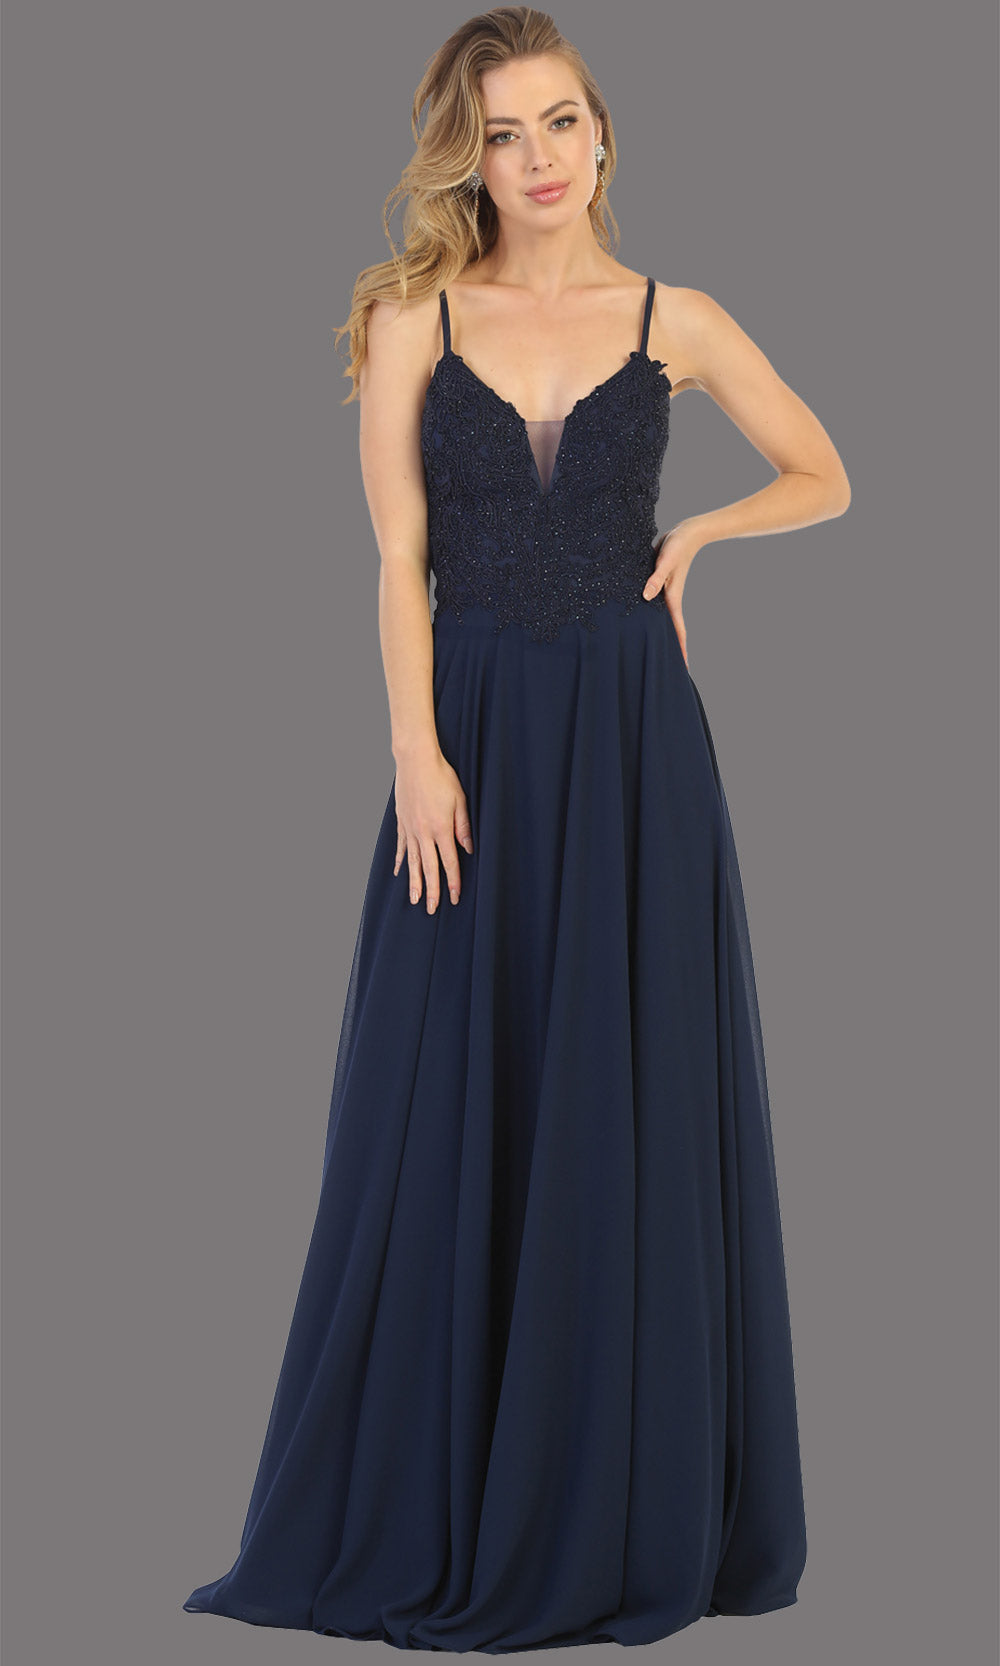 Mayqueen MQ1750 long navy flowy sleek & sexy dress w/straps. This dark blue dress is perfect for bridesmaid dresses, simple wedding guest dress, prom dress, gala, black tie wedding. Plus sizes are available, evening party dress.jpg